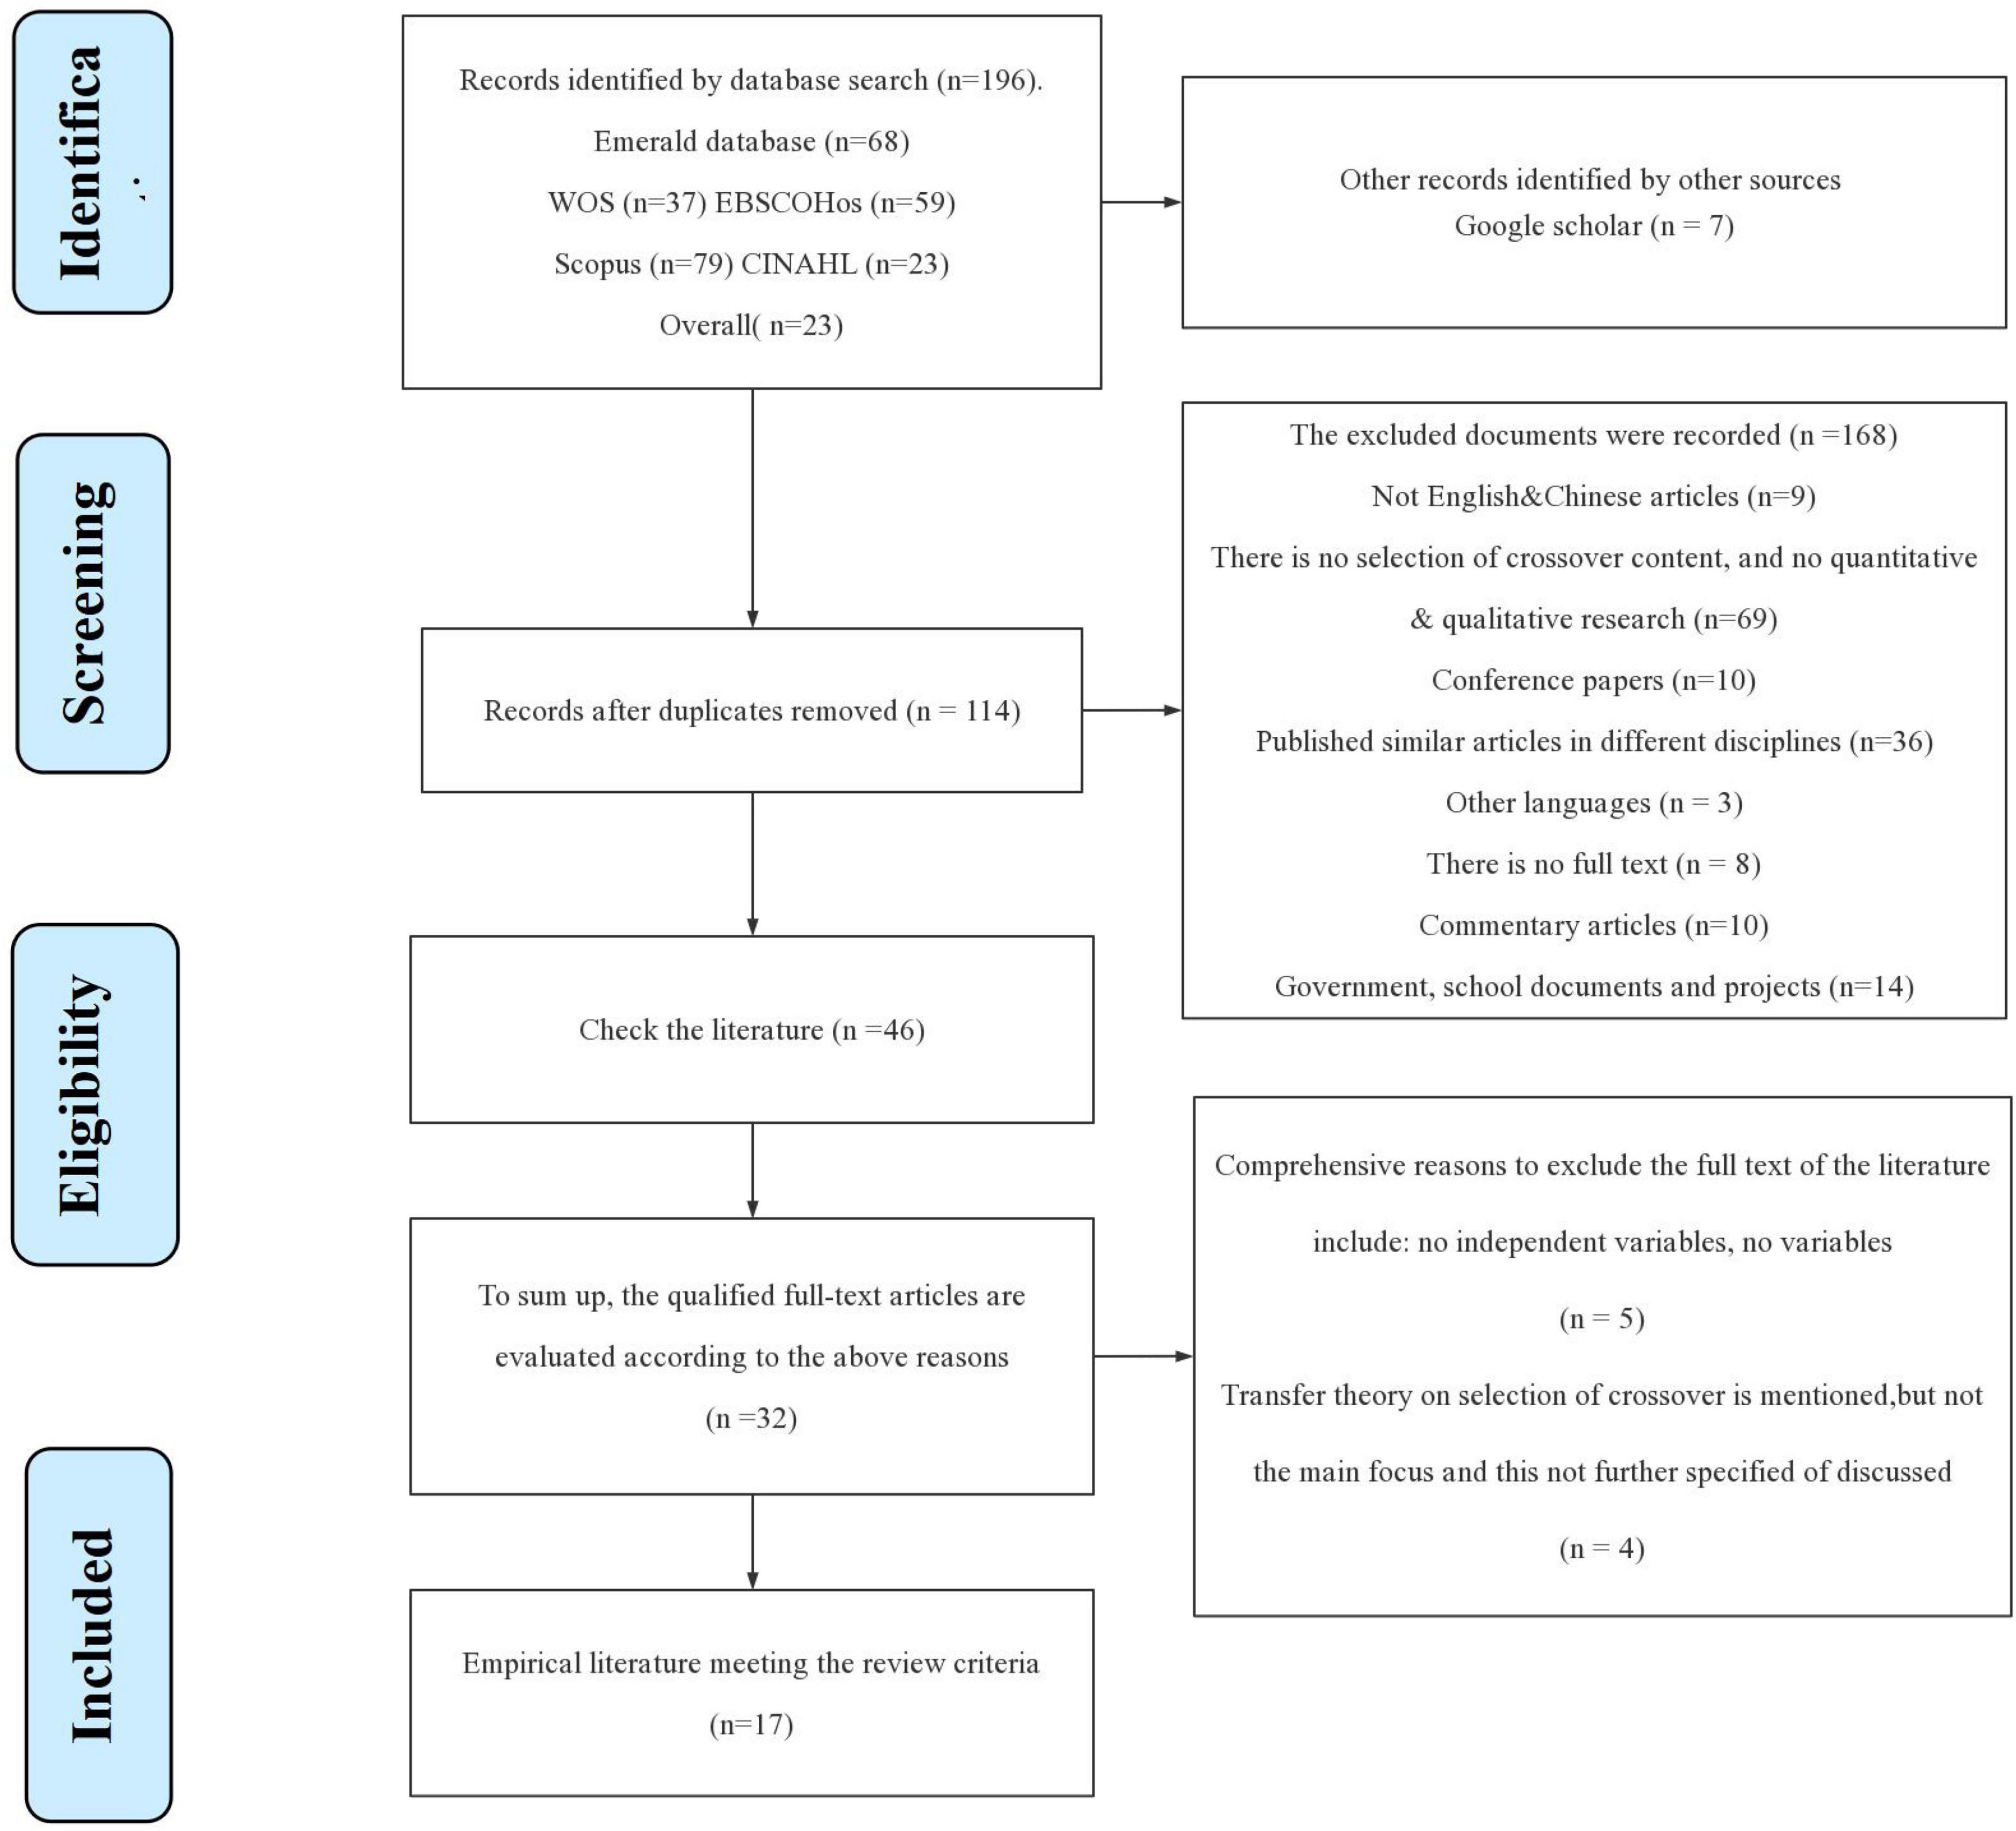 The effect of knowledge transfer theory on the selection of crossover winter sports athletes: A systematic literature review